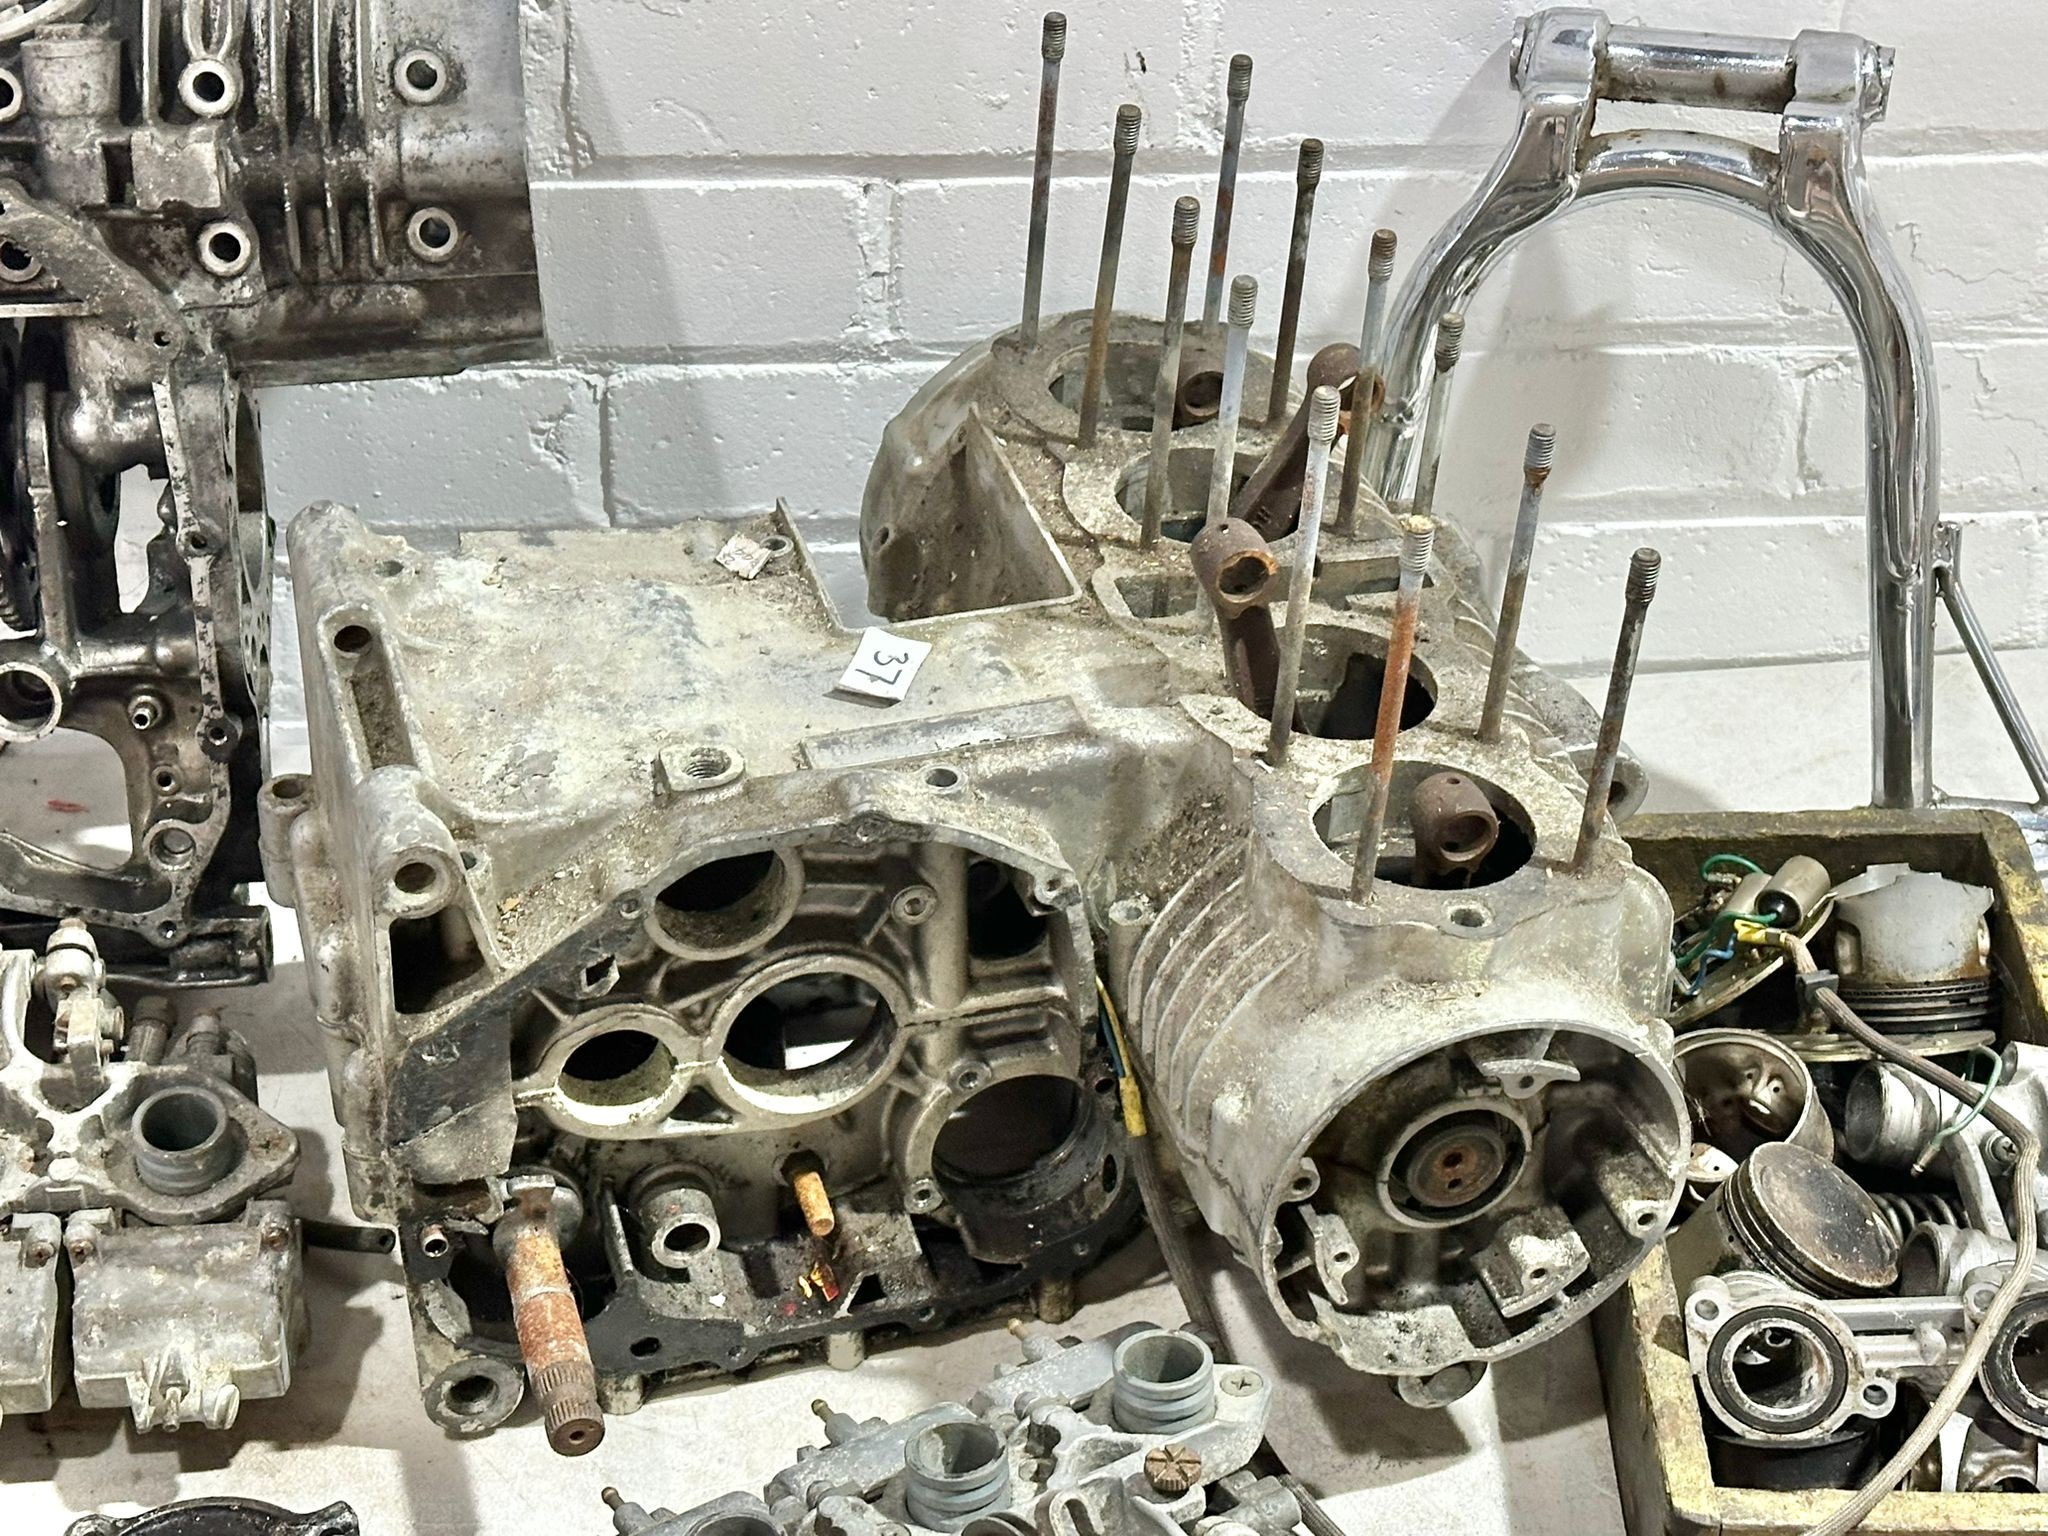 Honda CB500-4 parts with engine - Image 11 of 20